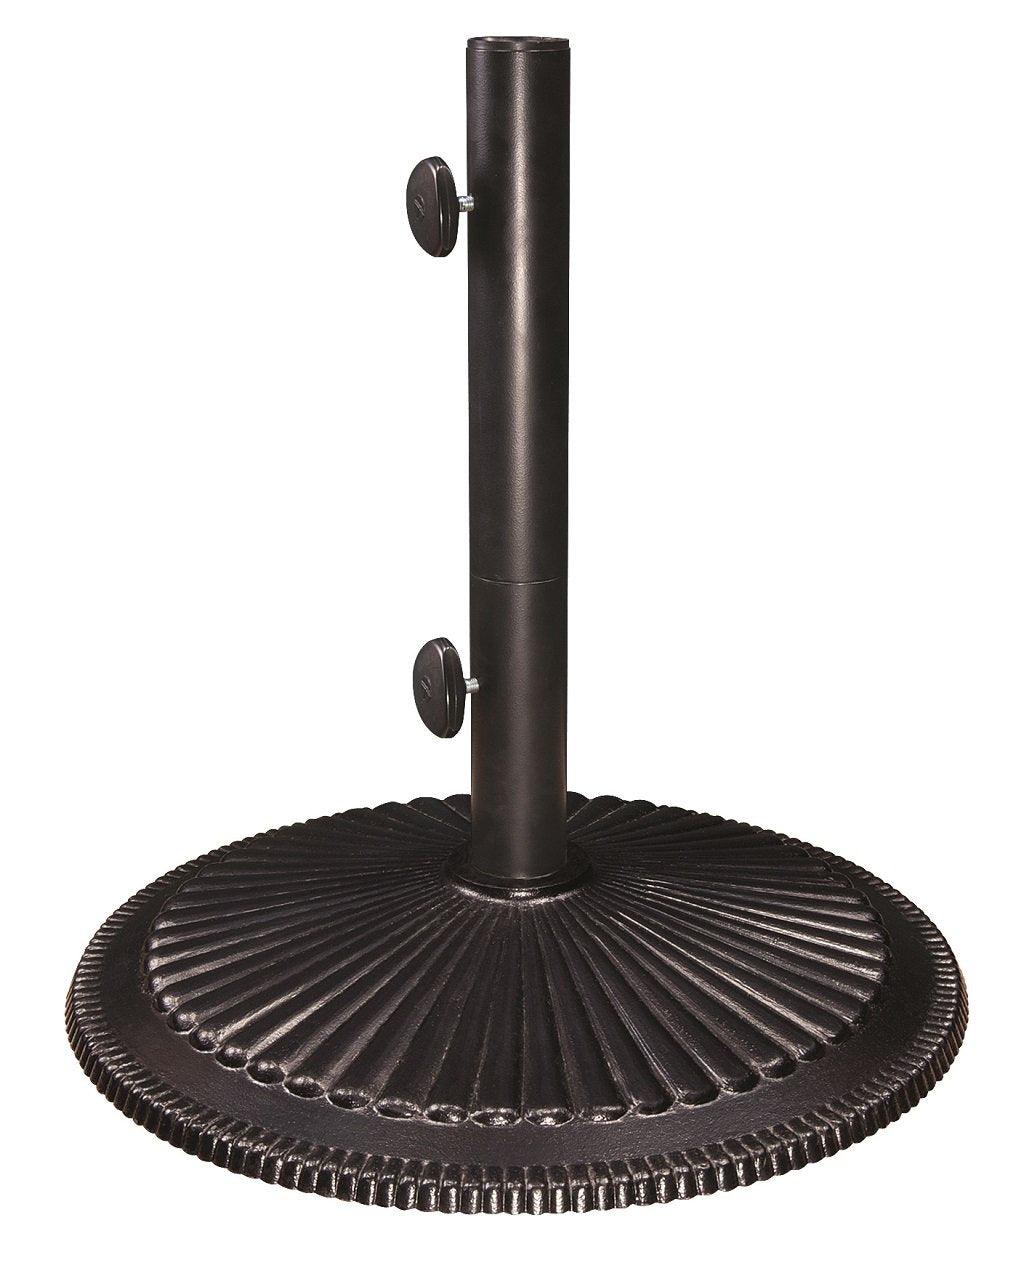 Secure your umbrella with a classic and carefully designed base. Weighing 50lbs, this base was designed to hold and fasten for you to thoroughly enjoy your outdoor living space. 